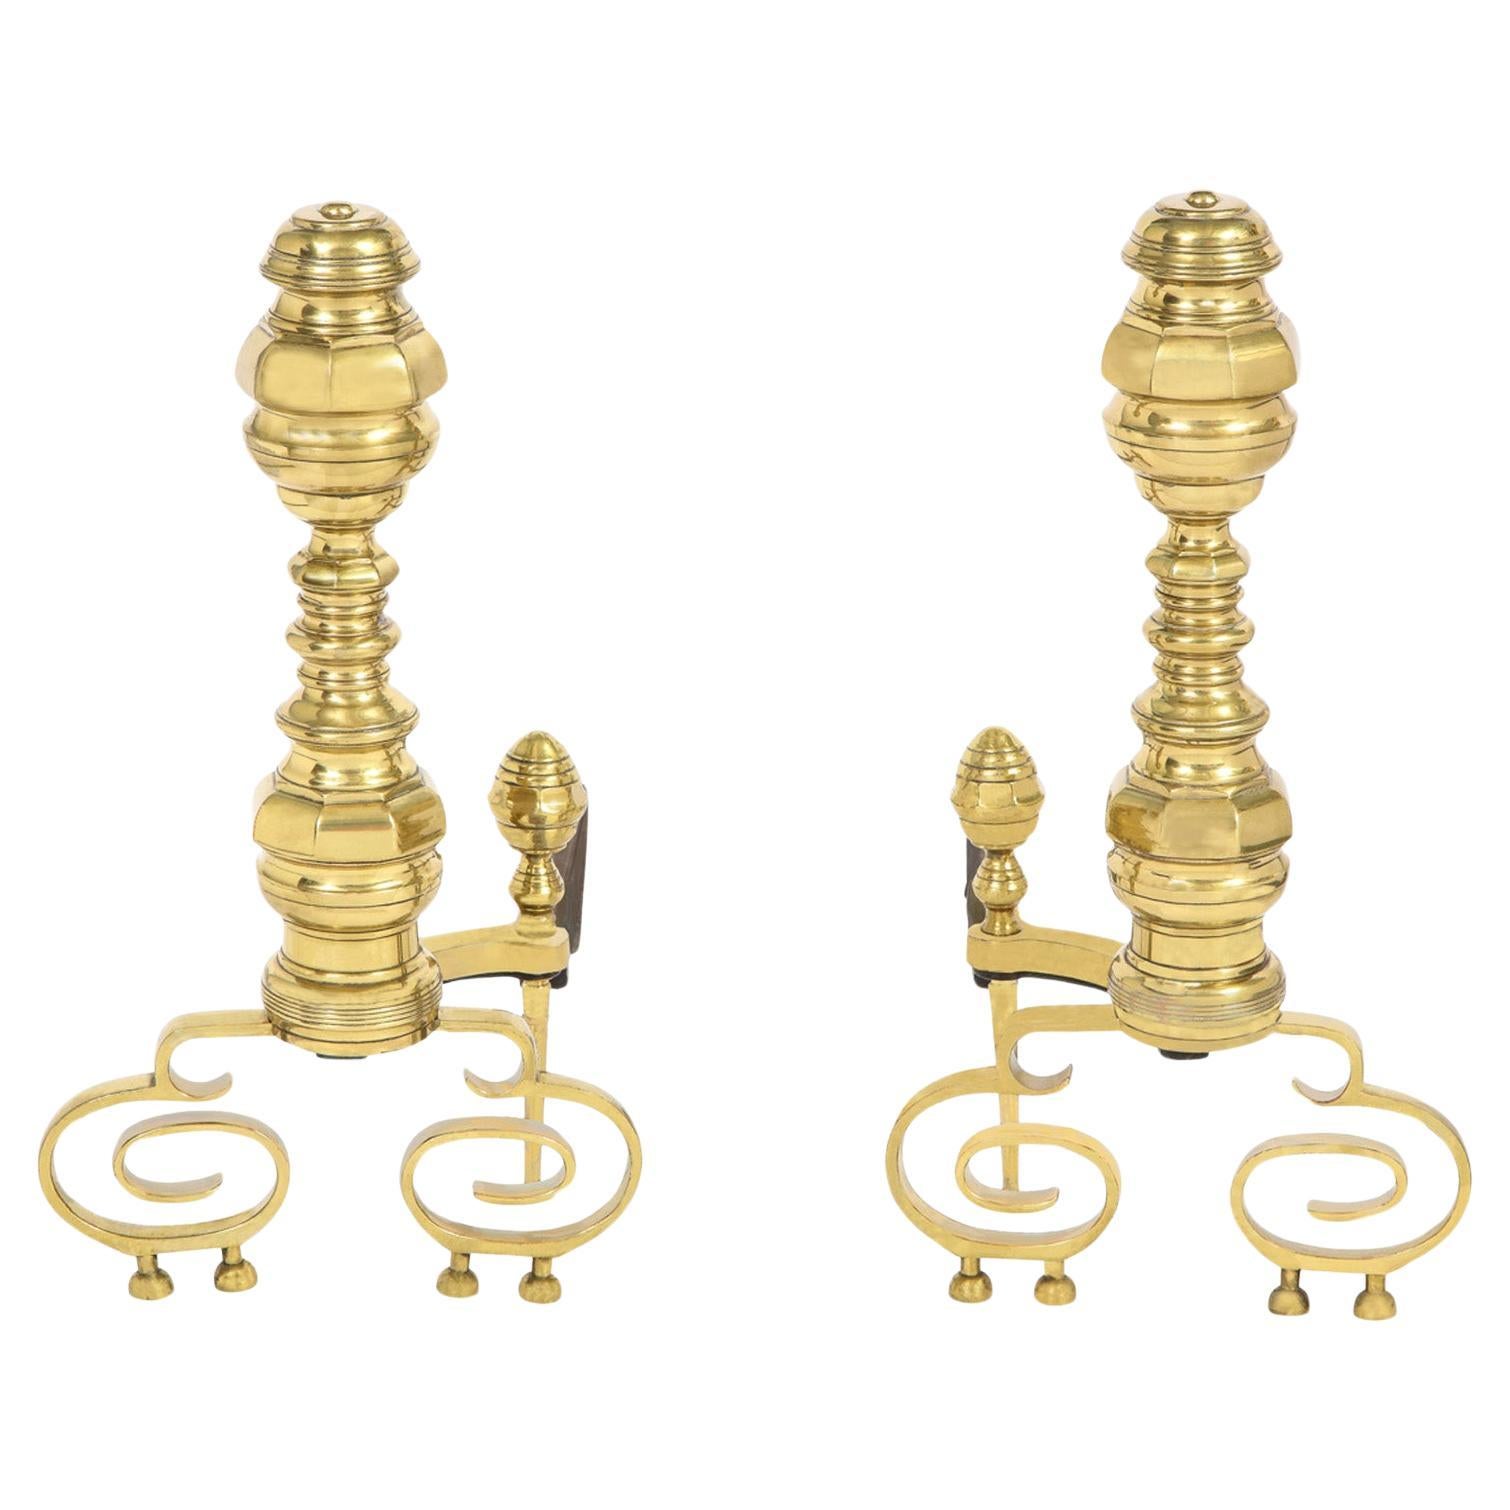 Pair of Artisan Andirons in Polished Brass and Wrought-Iron 1970s